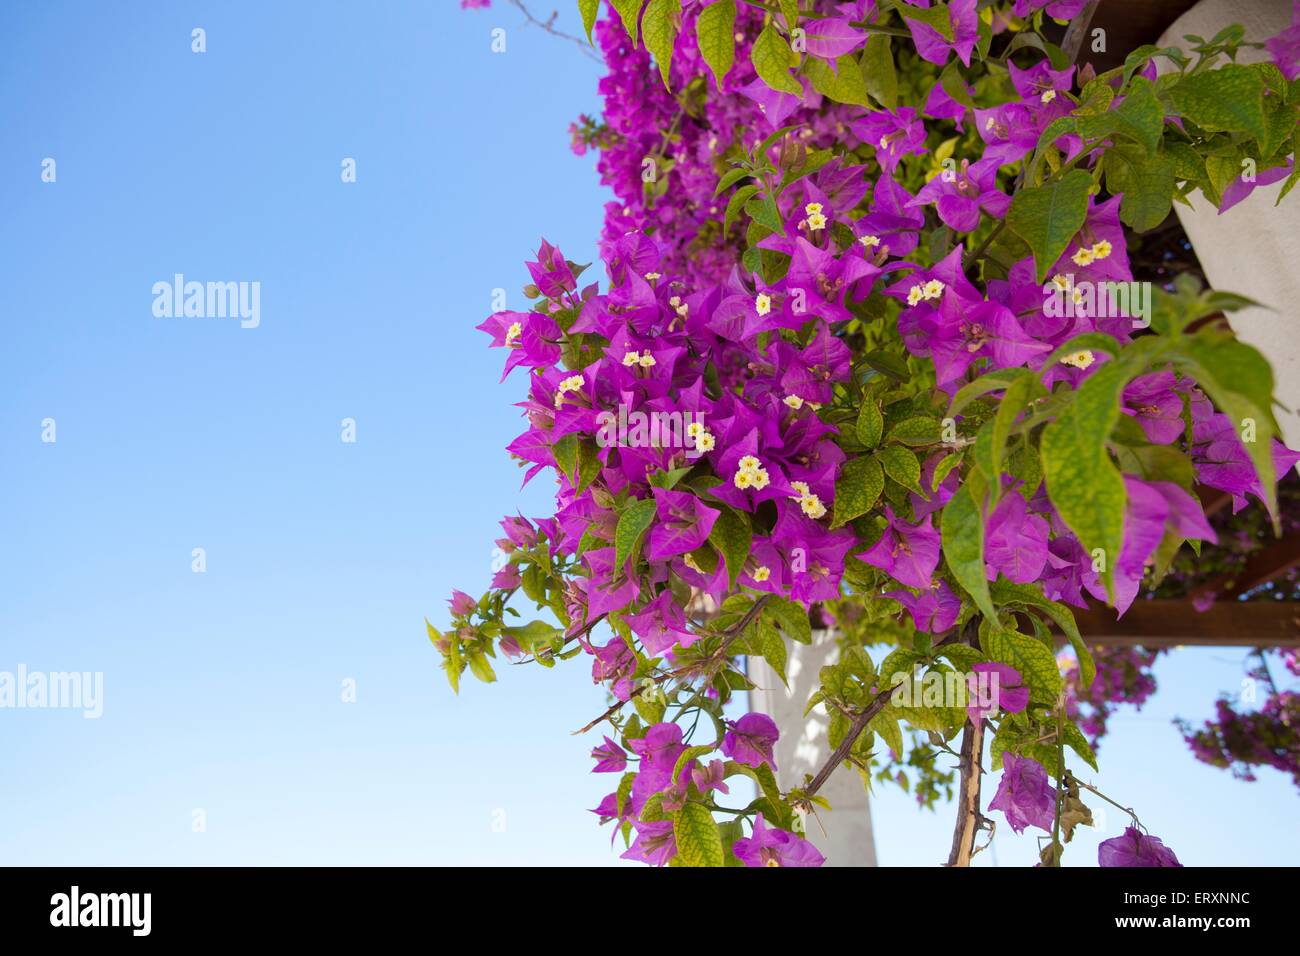 Deep pink bougainvilleas, an ornamental plant found in hot countries around the mediterranean, South America and Portugal. Stock Photo